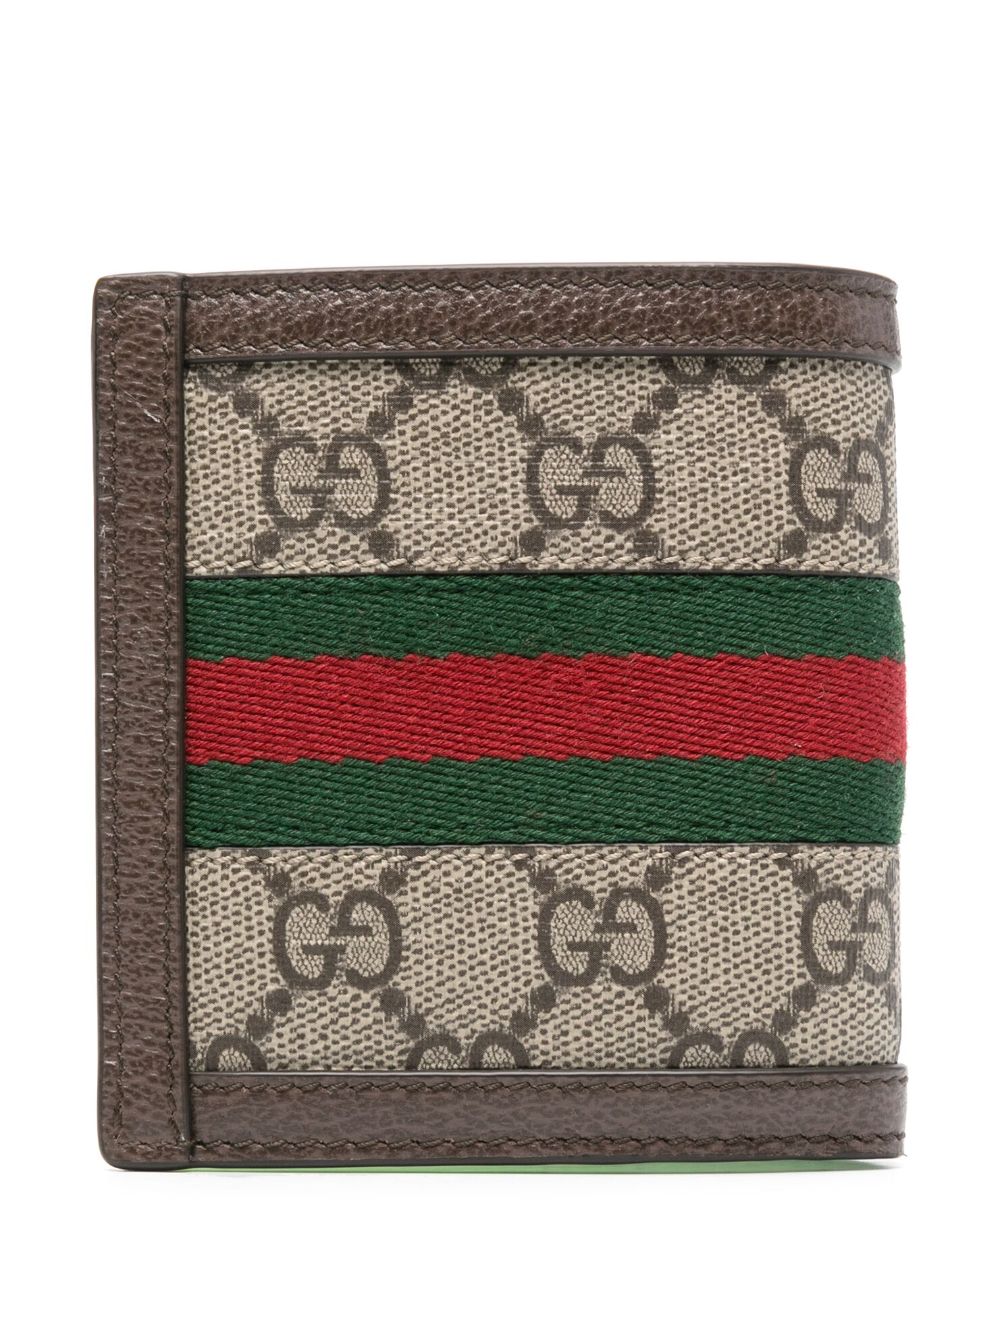 Gucci Ophidia GG Supreme wallet - Beige